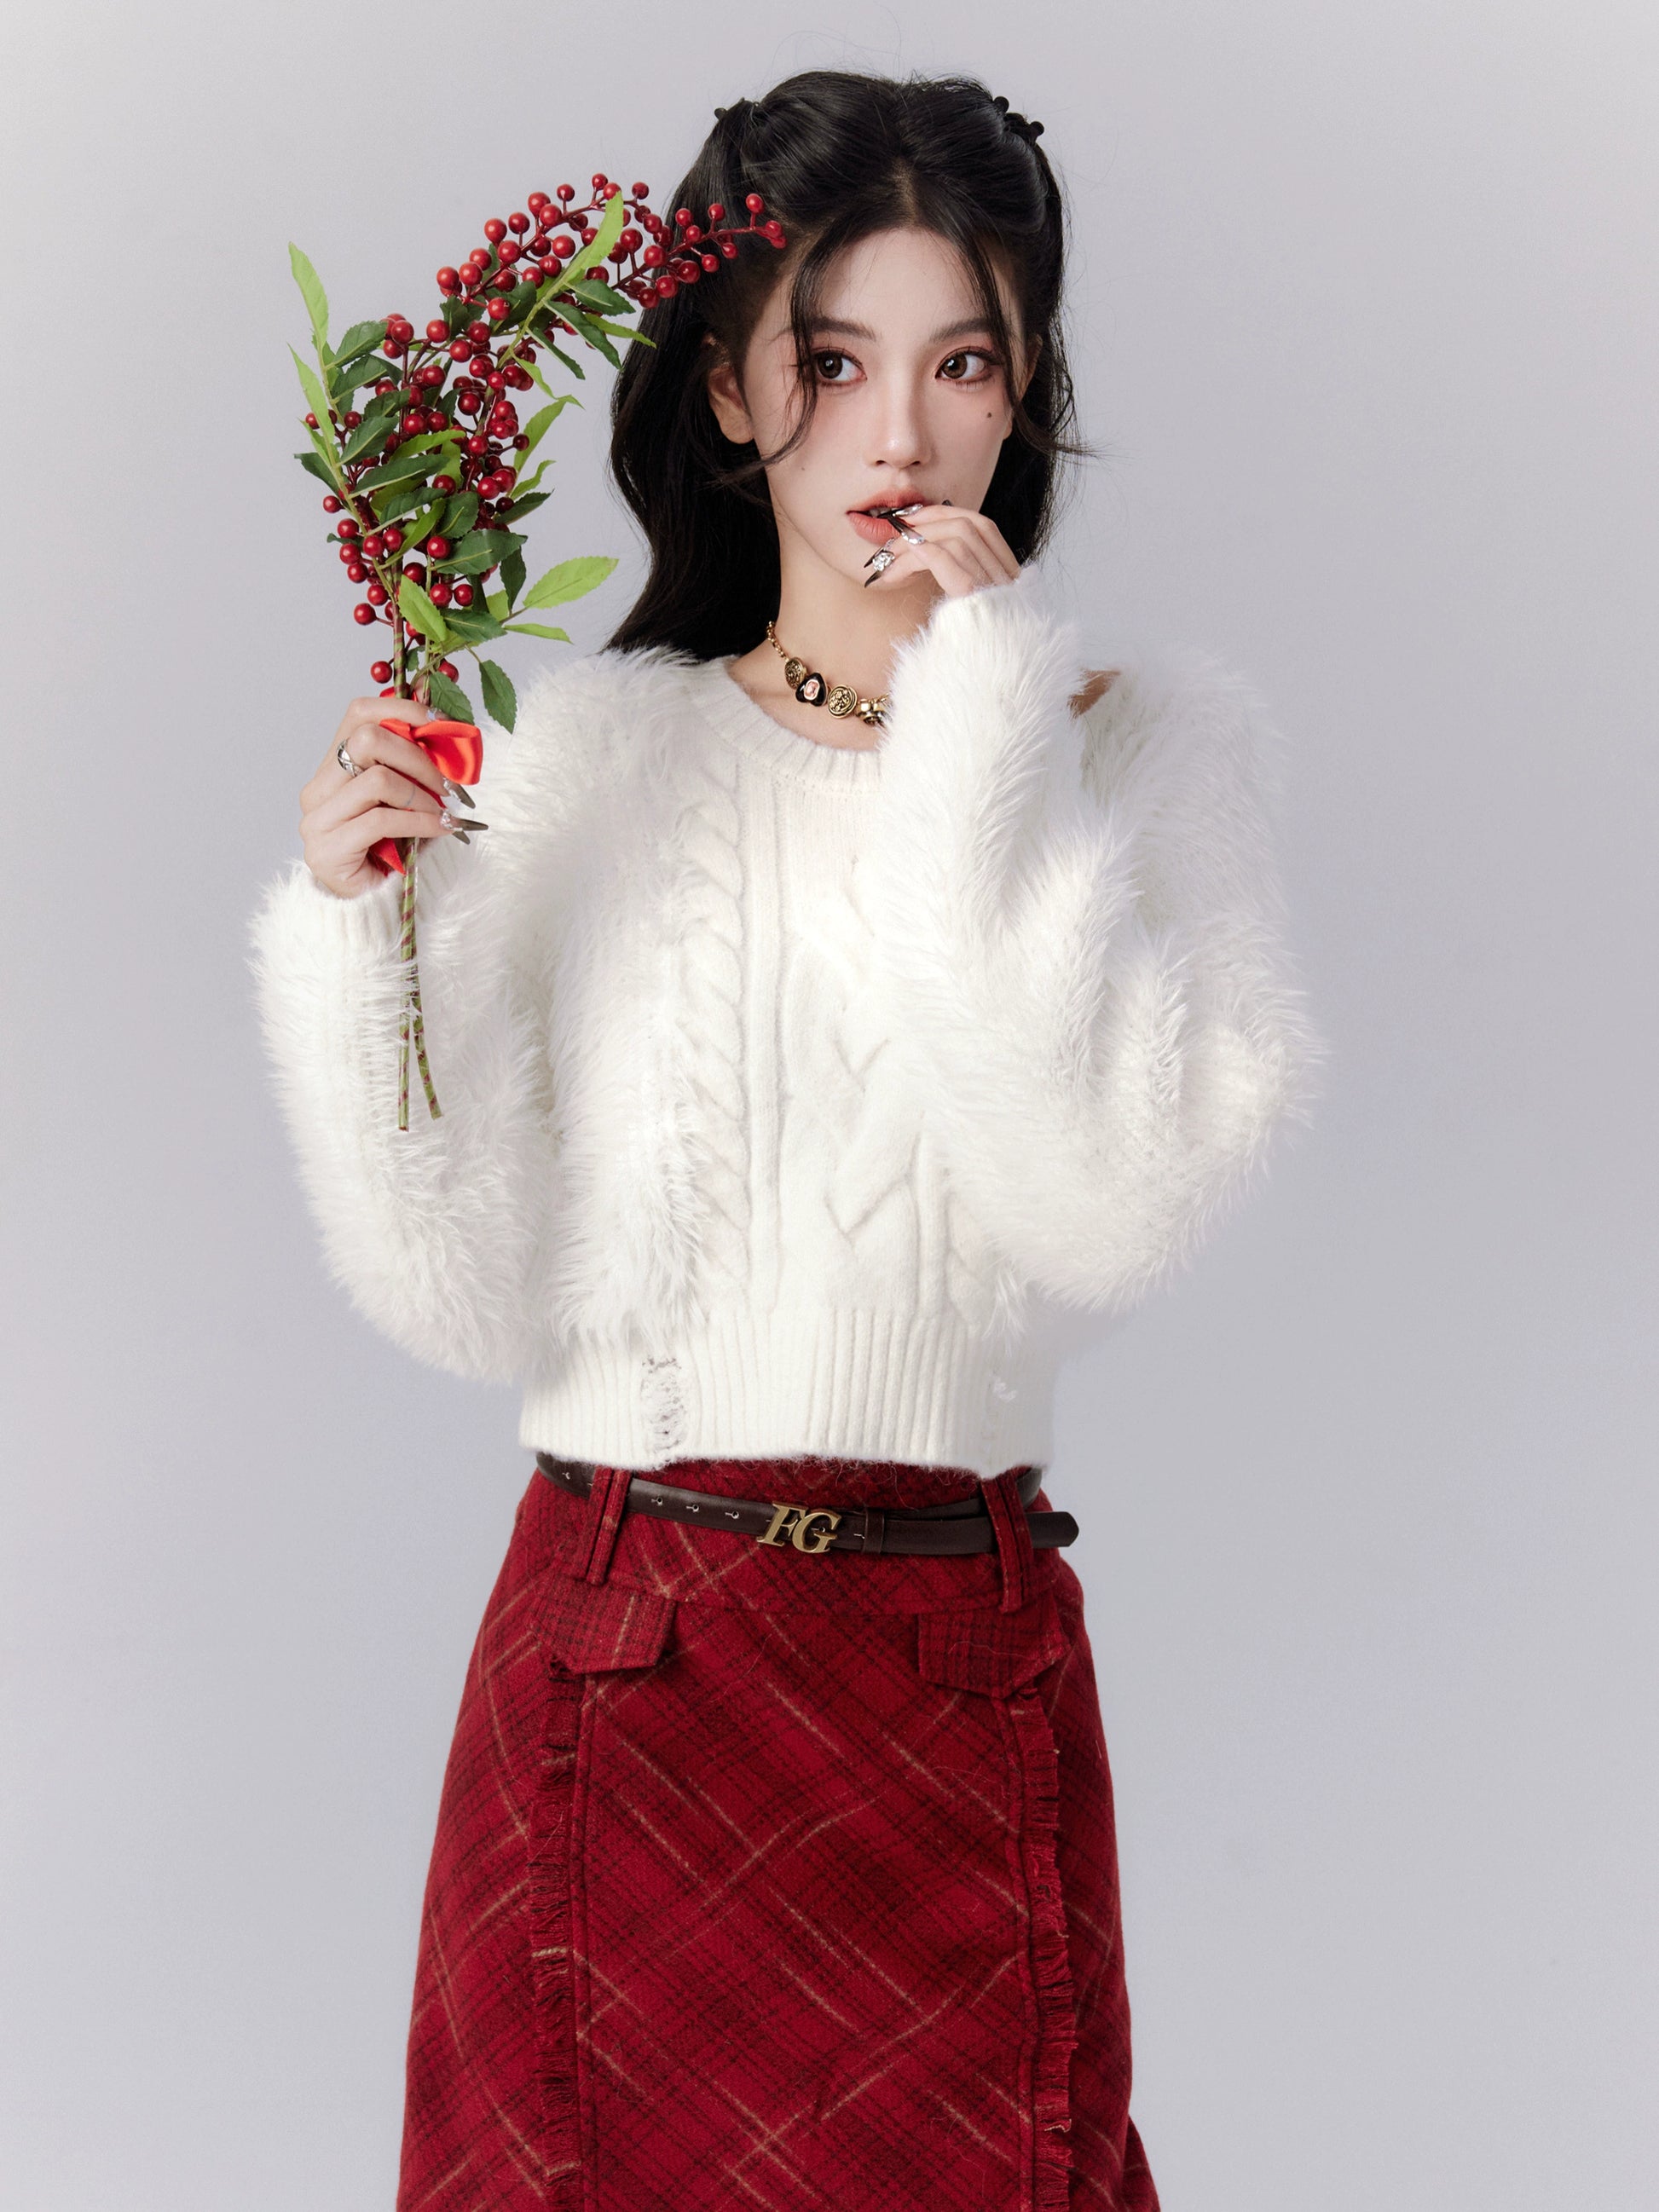 FGHT Twisted Flower Knitted White Sweater